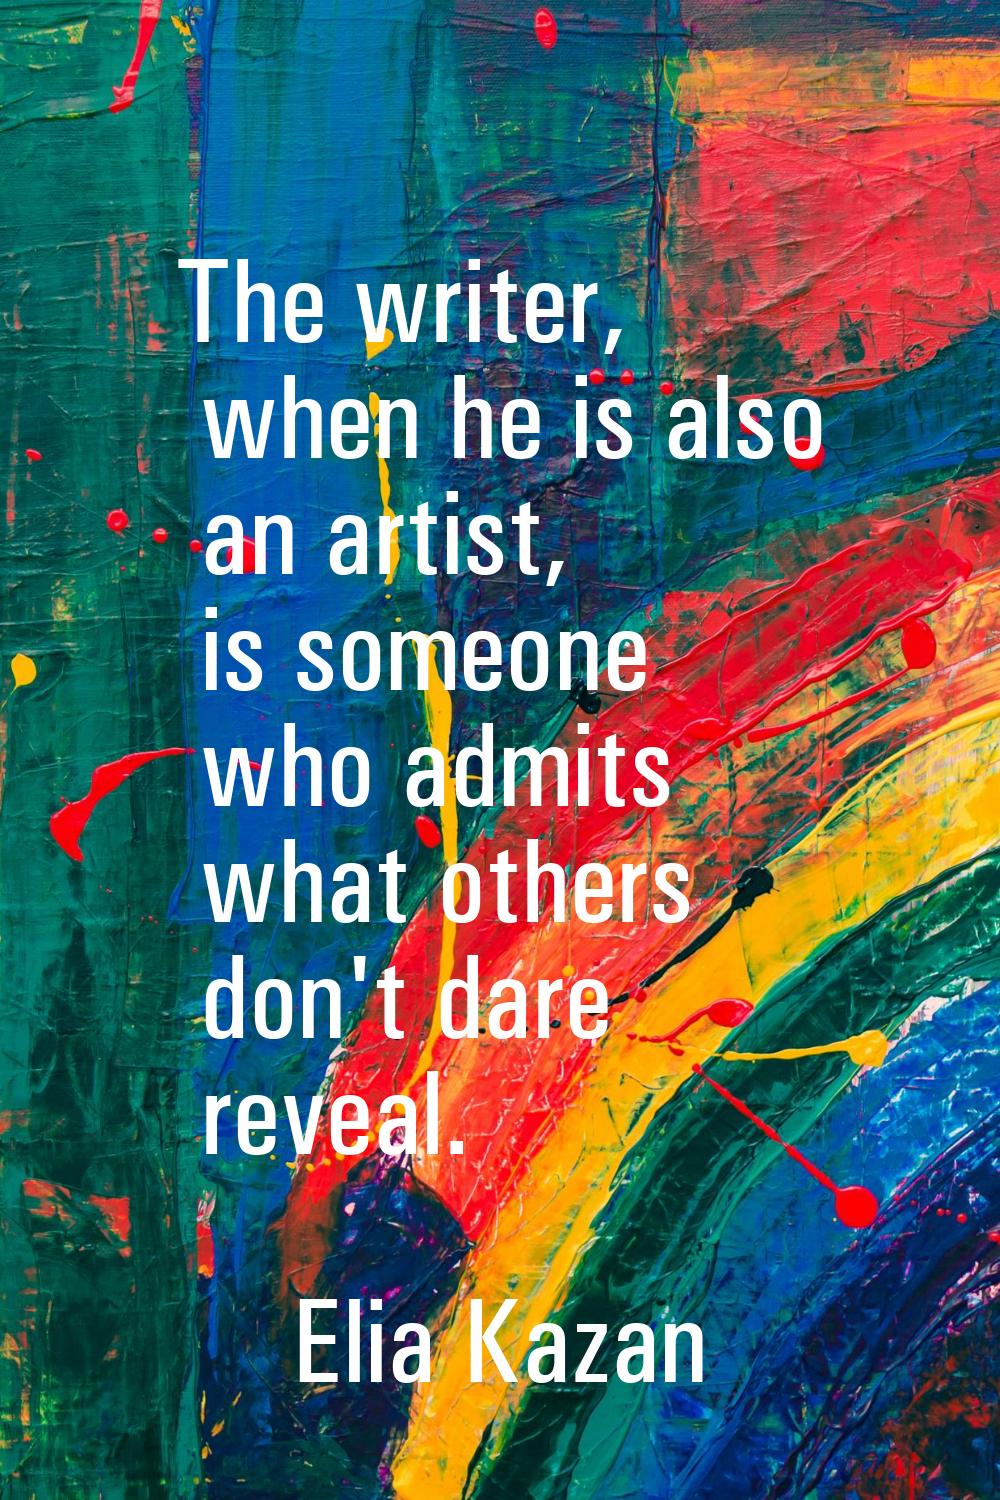 The writer, when he is also an artist, is someone who admits what others don't dare reveal.